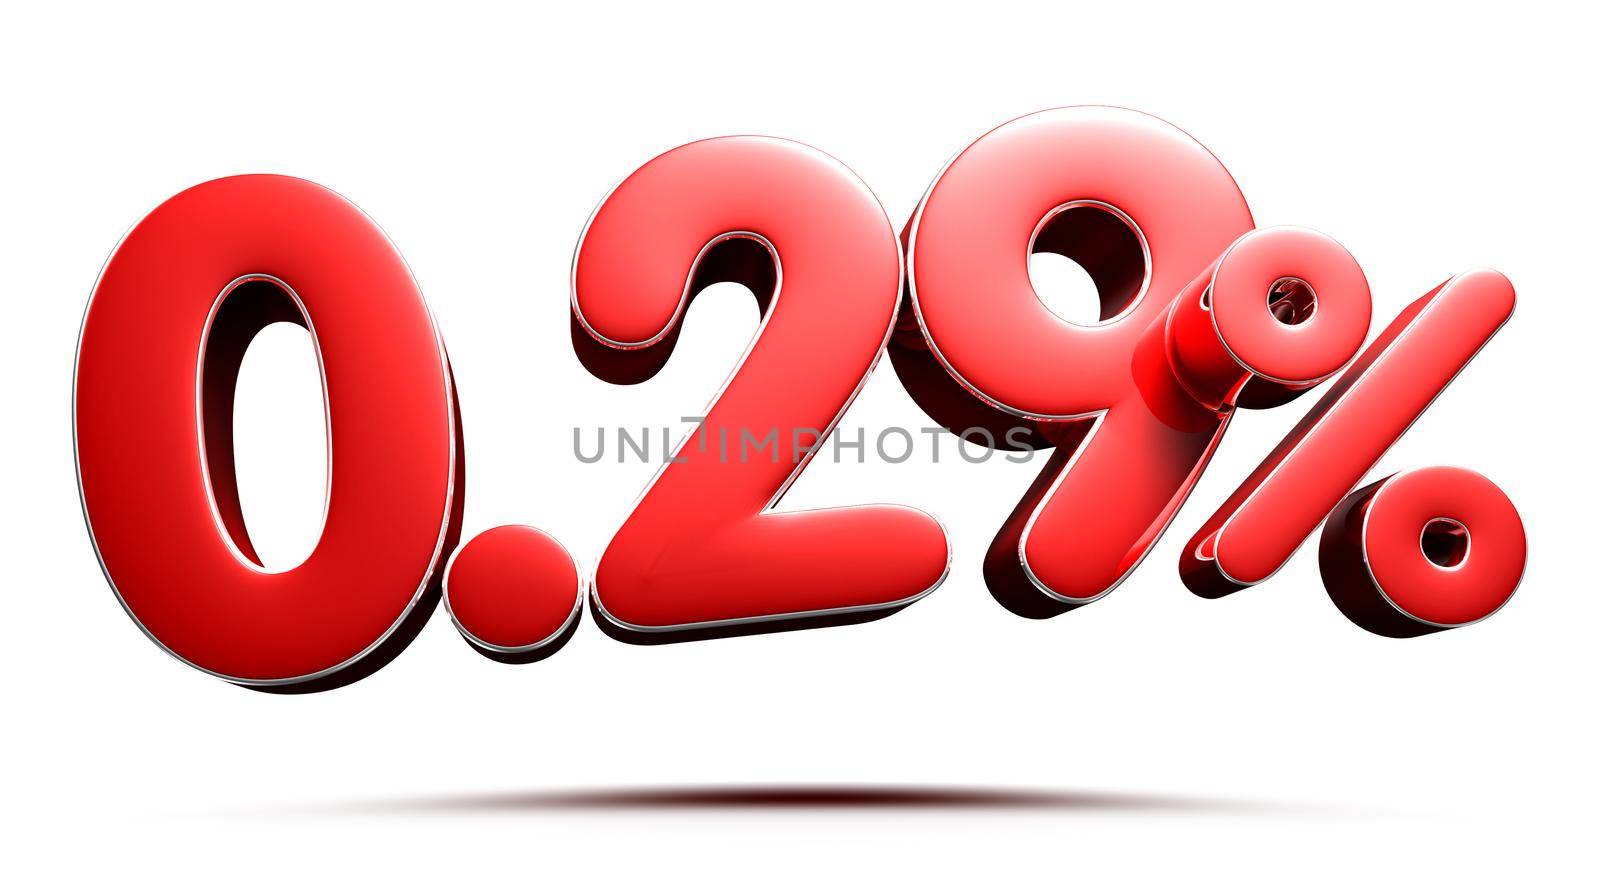 0.29 percent red on white background illustration 3D rendering with clipping path. by thitimontoyai